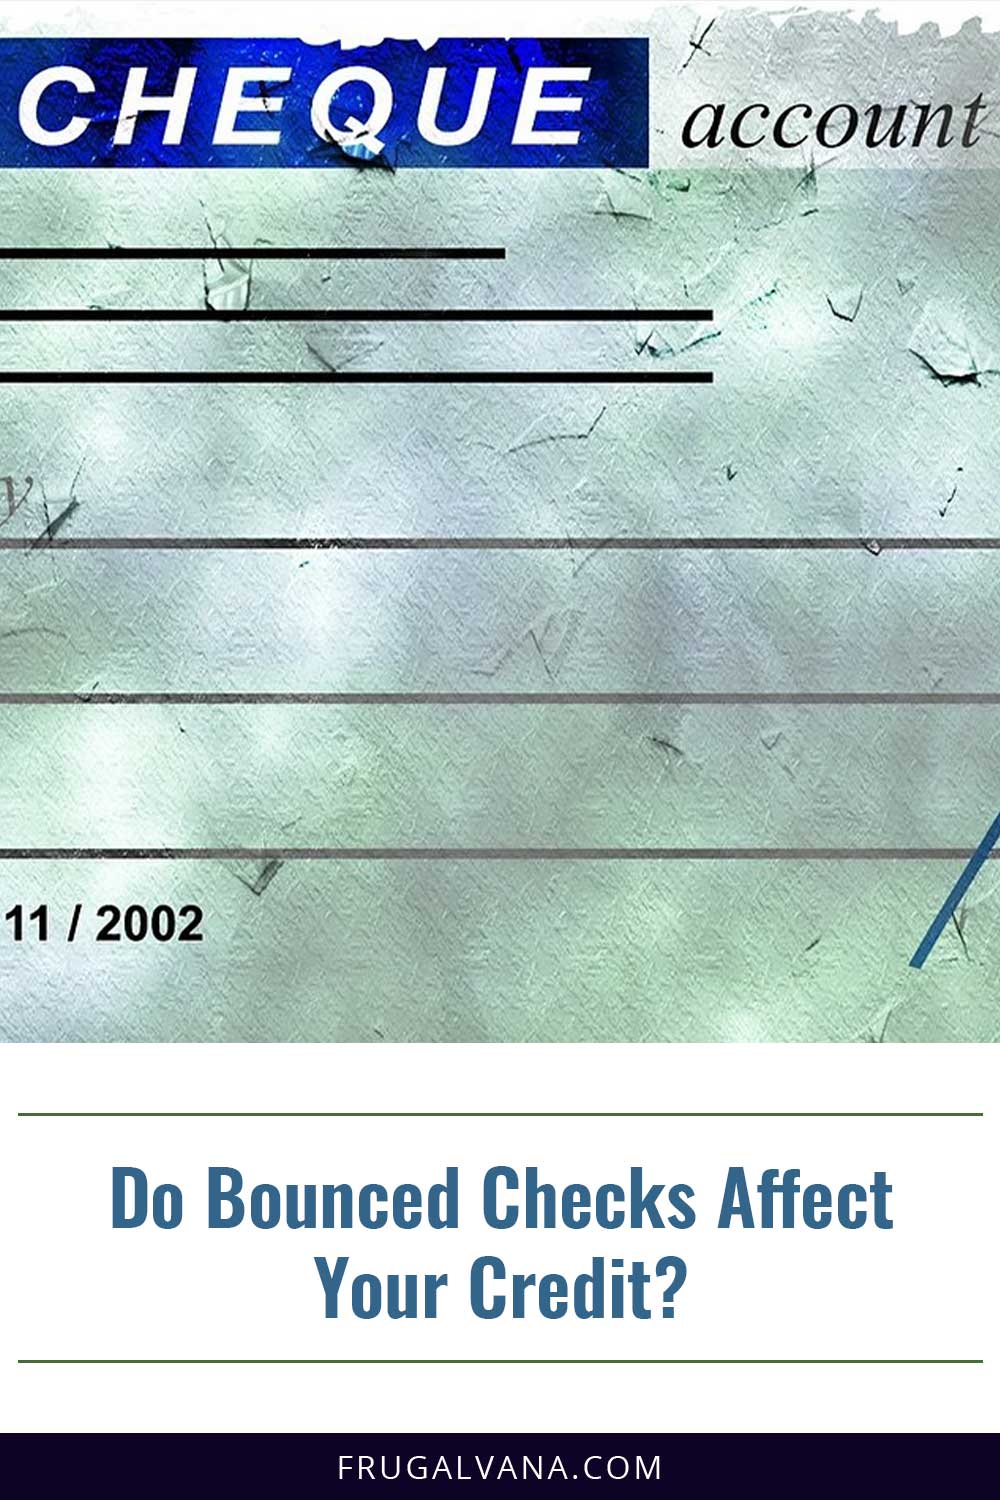 Do Bounced Checks Affect Your Credit?